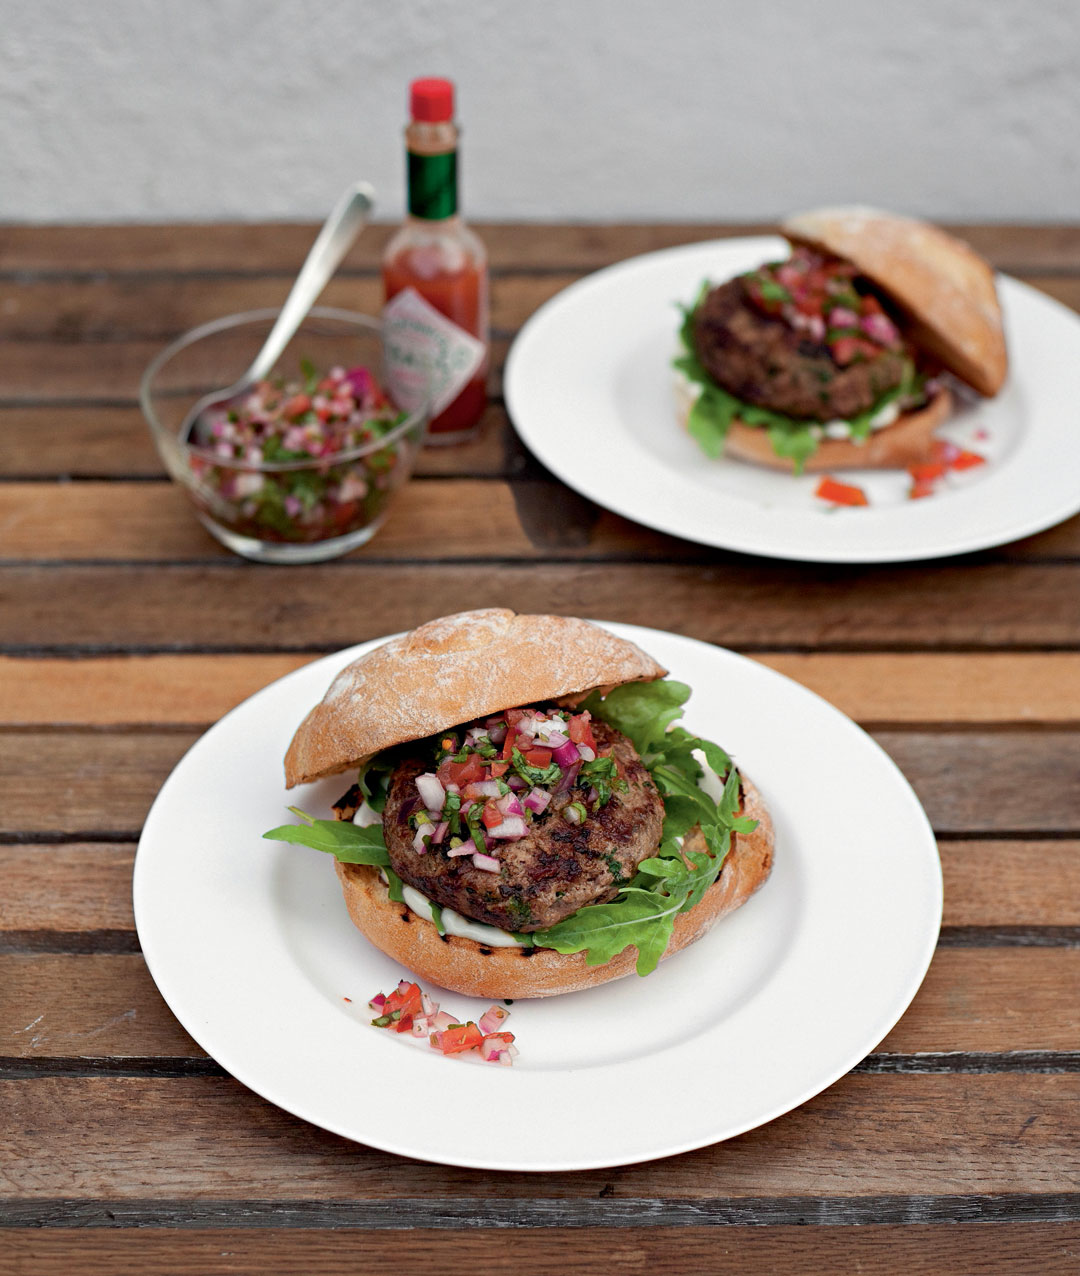 Jane Hornby's Simple & Classic dish for National Burger Day